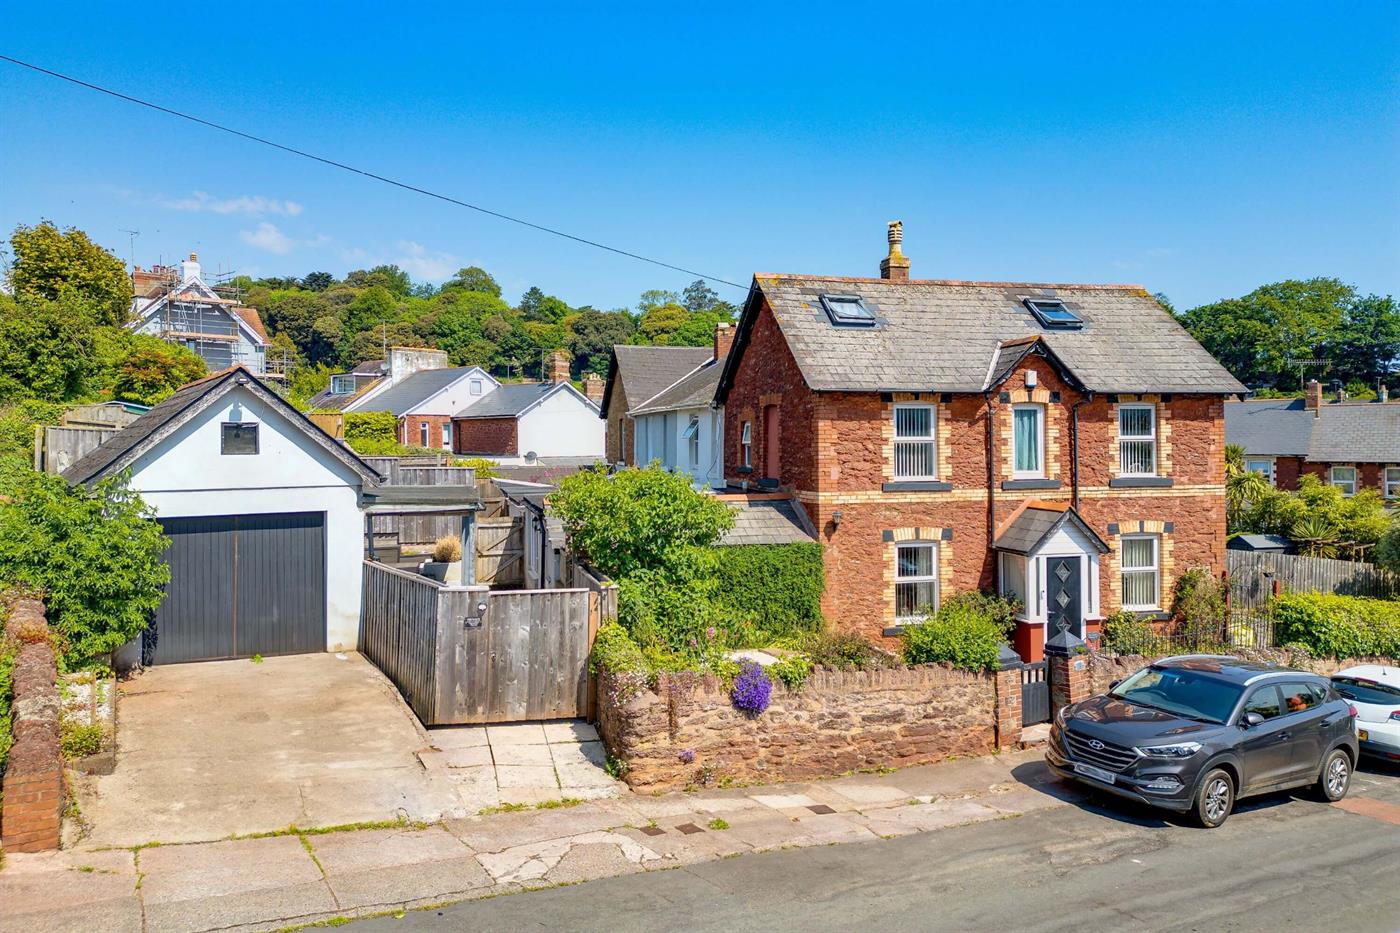 5 Bedroom End of Terrace House for Sale: Sherwell Hill, Chelston, Torquay, TQ2 6LU